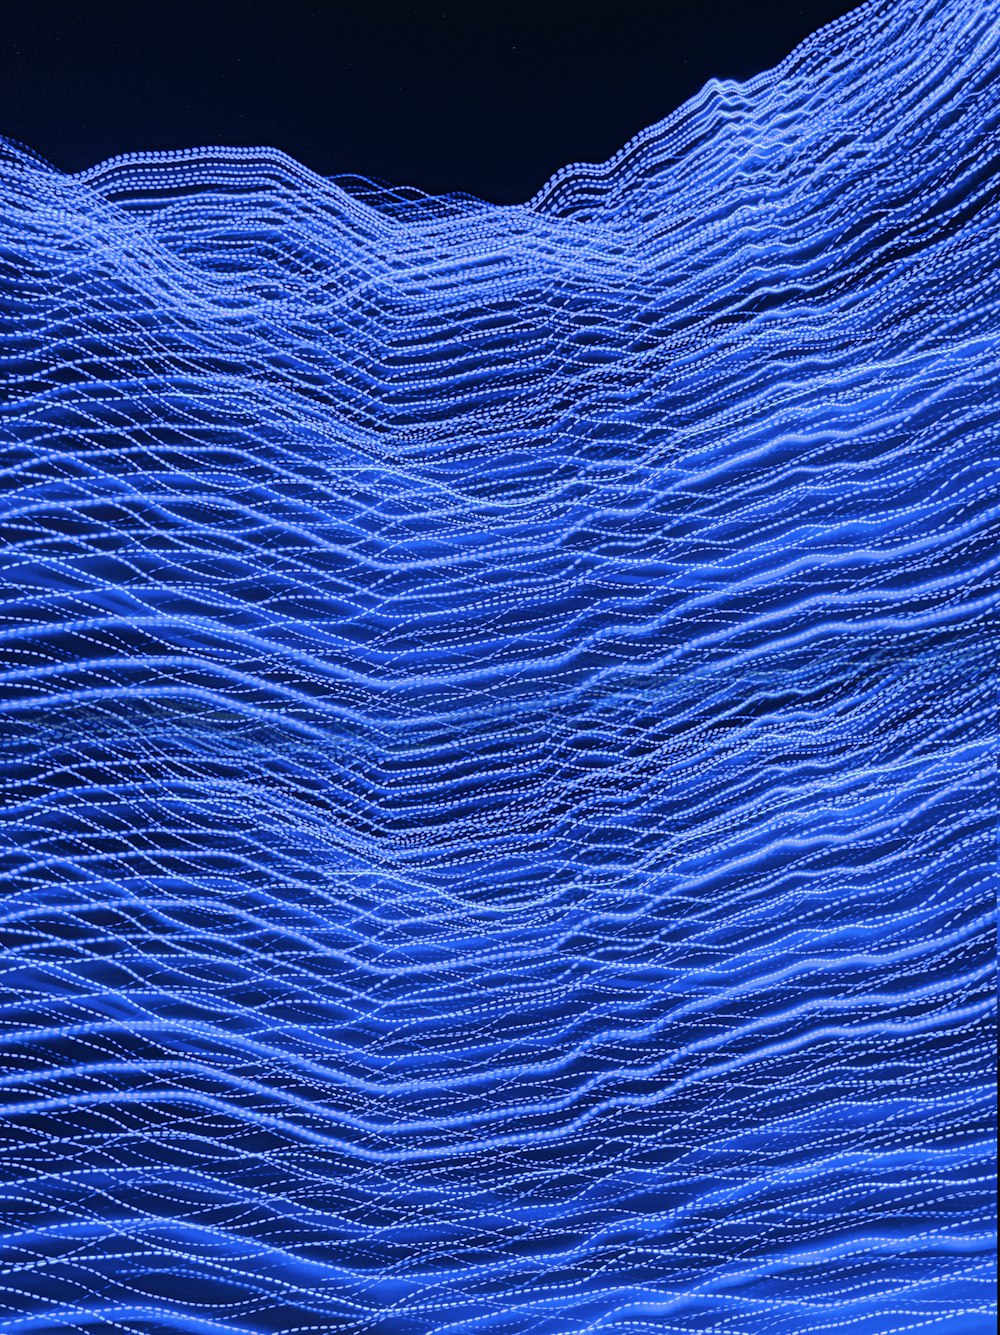 a large blue wave is shown in the night sky